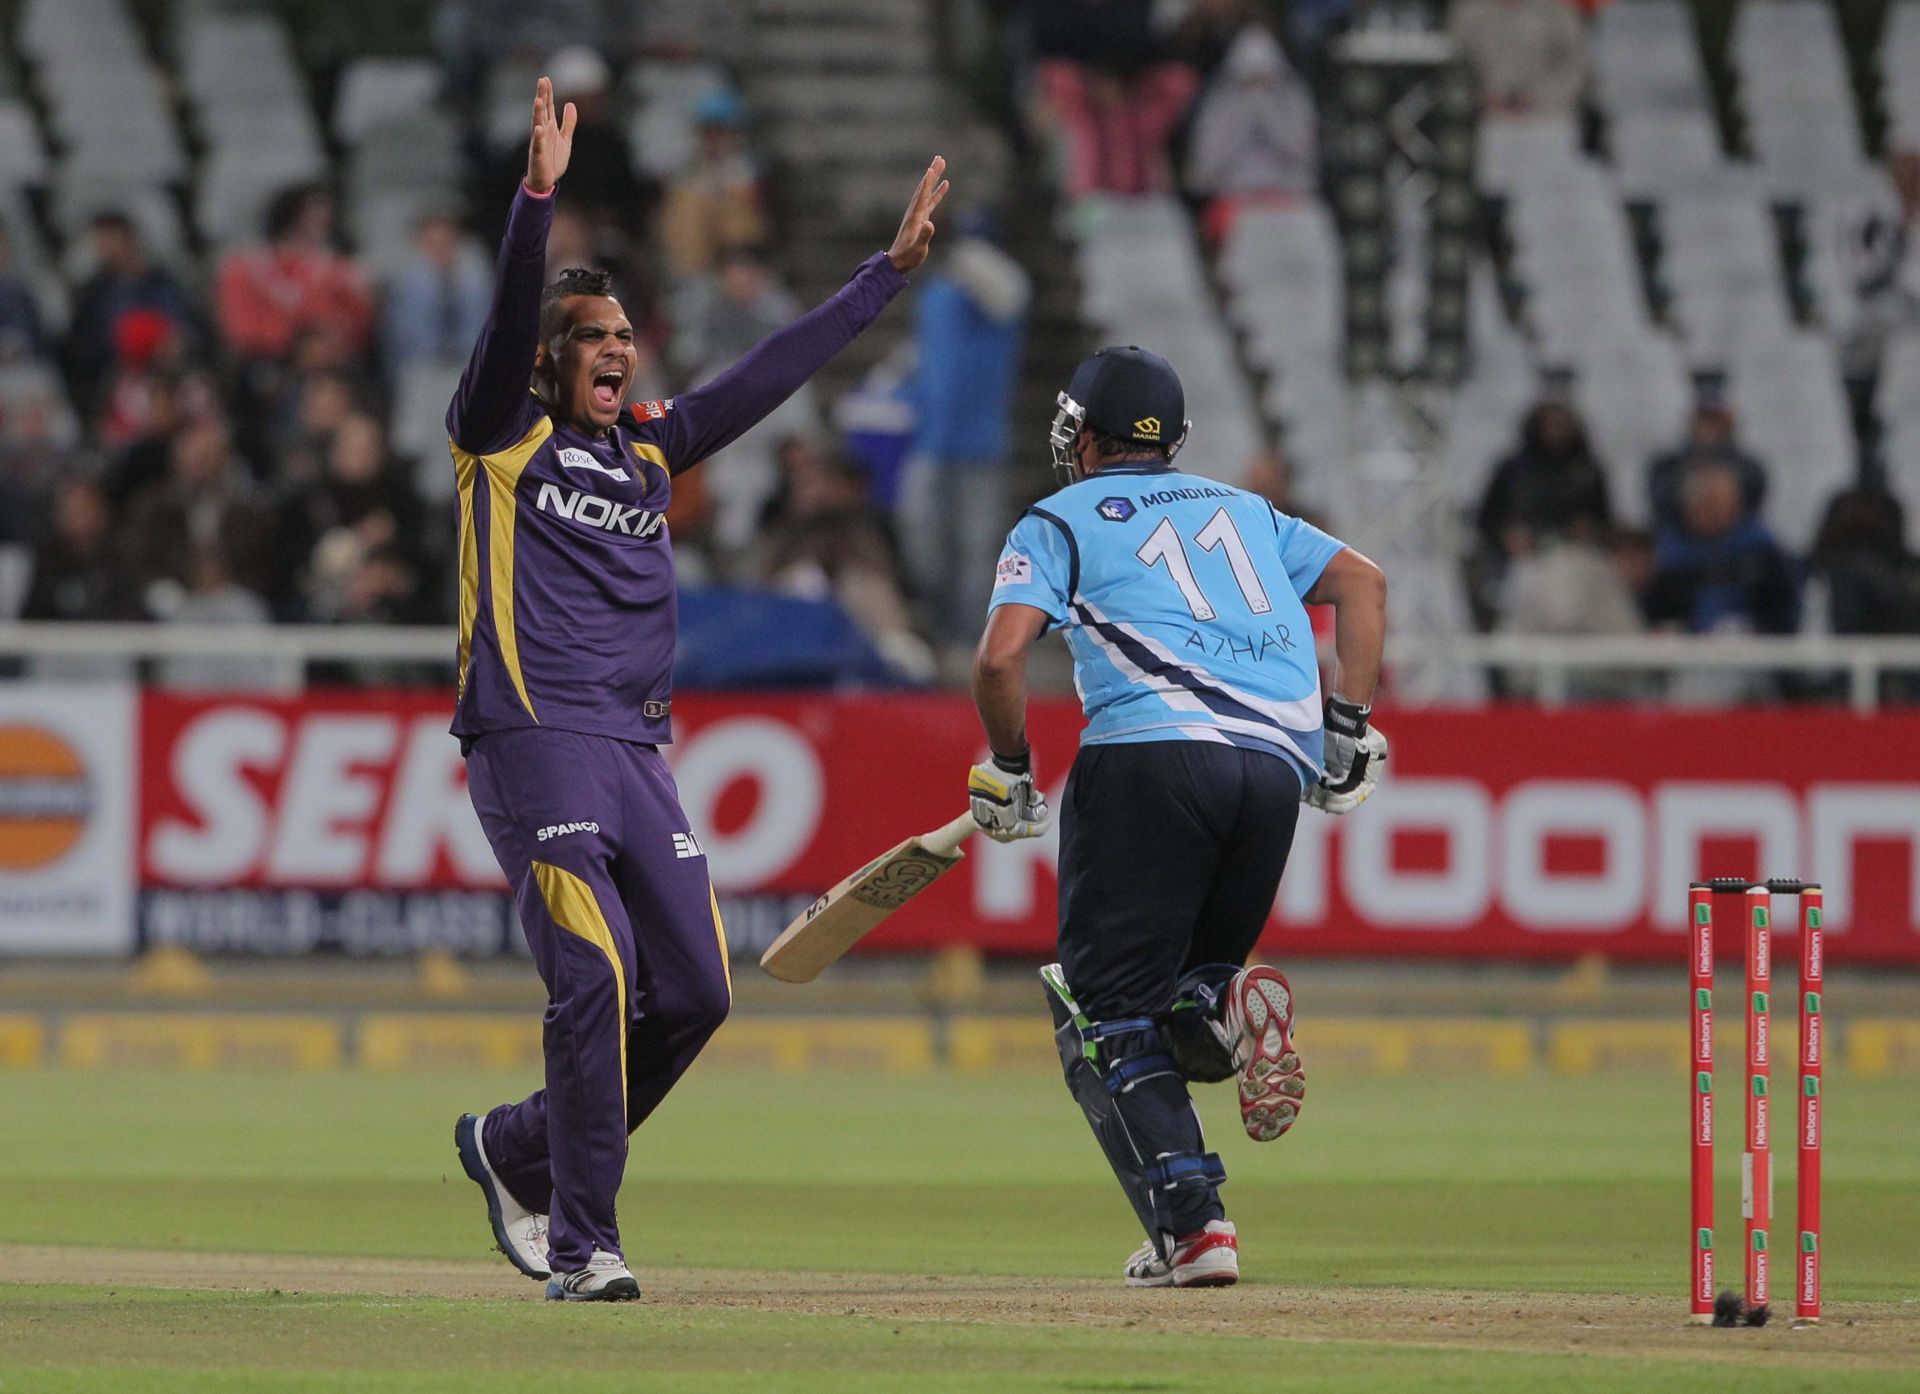 Sunil Narine has been a match-winner for Kolkata for a number of years. (Image Credit: Getty Images)